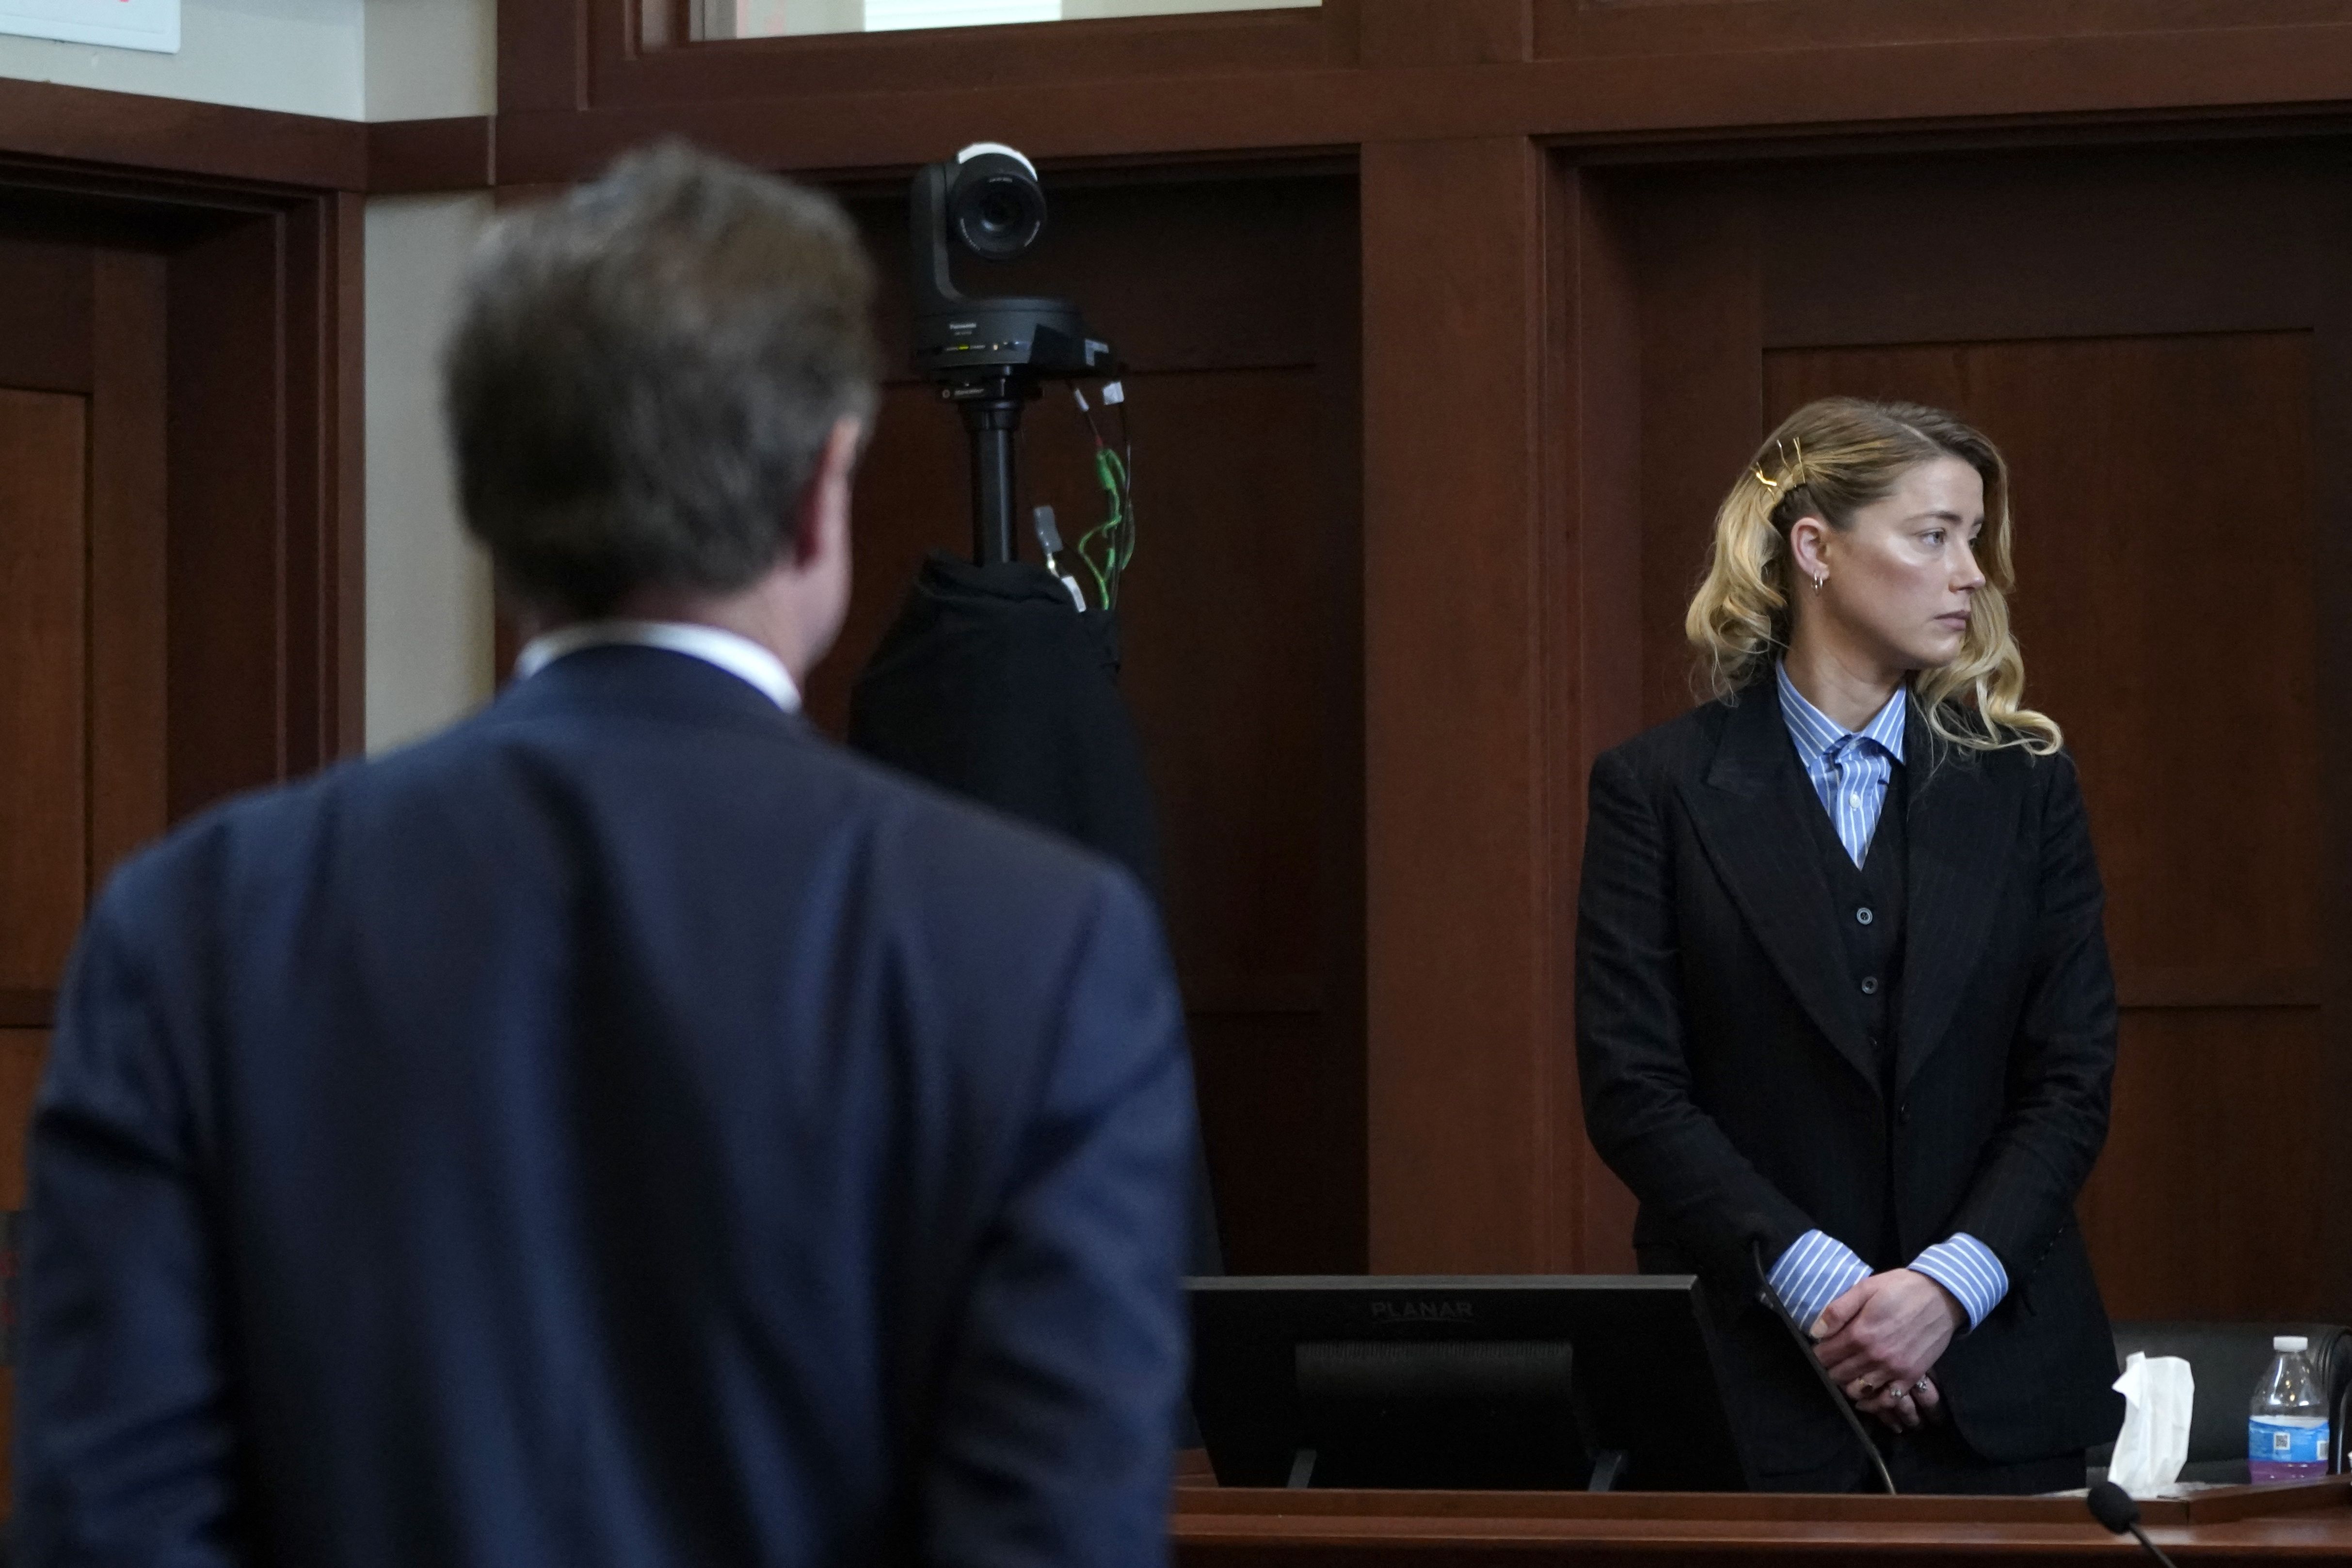 ctor Amber Heard stands up for recess as Ben Chew, attorney for actor Johnny Depp, looks on at Fairfax County Circuit Court during a defamation case against her by Depp in Fairfax, Virginia, on May 4, 2022. - US actor Johnny Depp sued his ex-wife Amber Heard for libel in Fairfax County Circuit Court after she wrote an op-ed piece in The Washington Post in 2018 referring to herself as a "public figure representing domestic abuse."